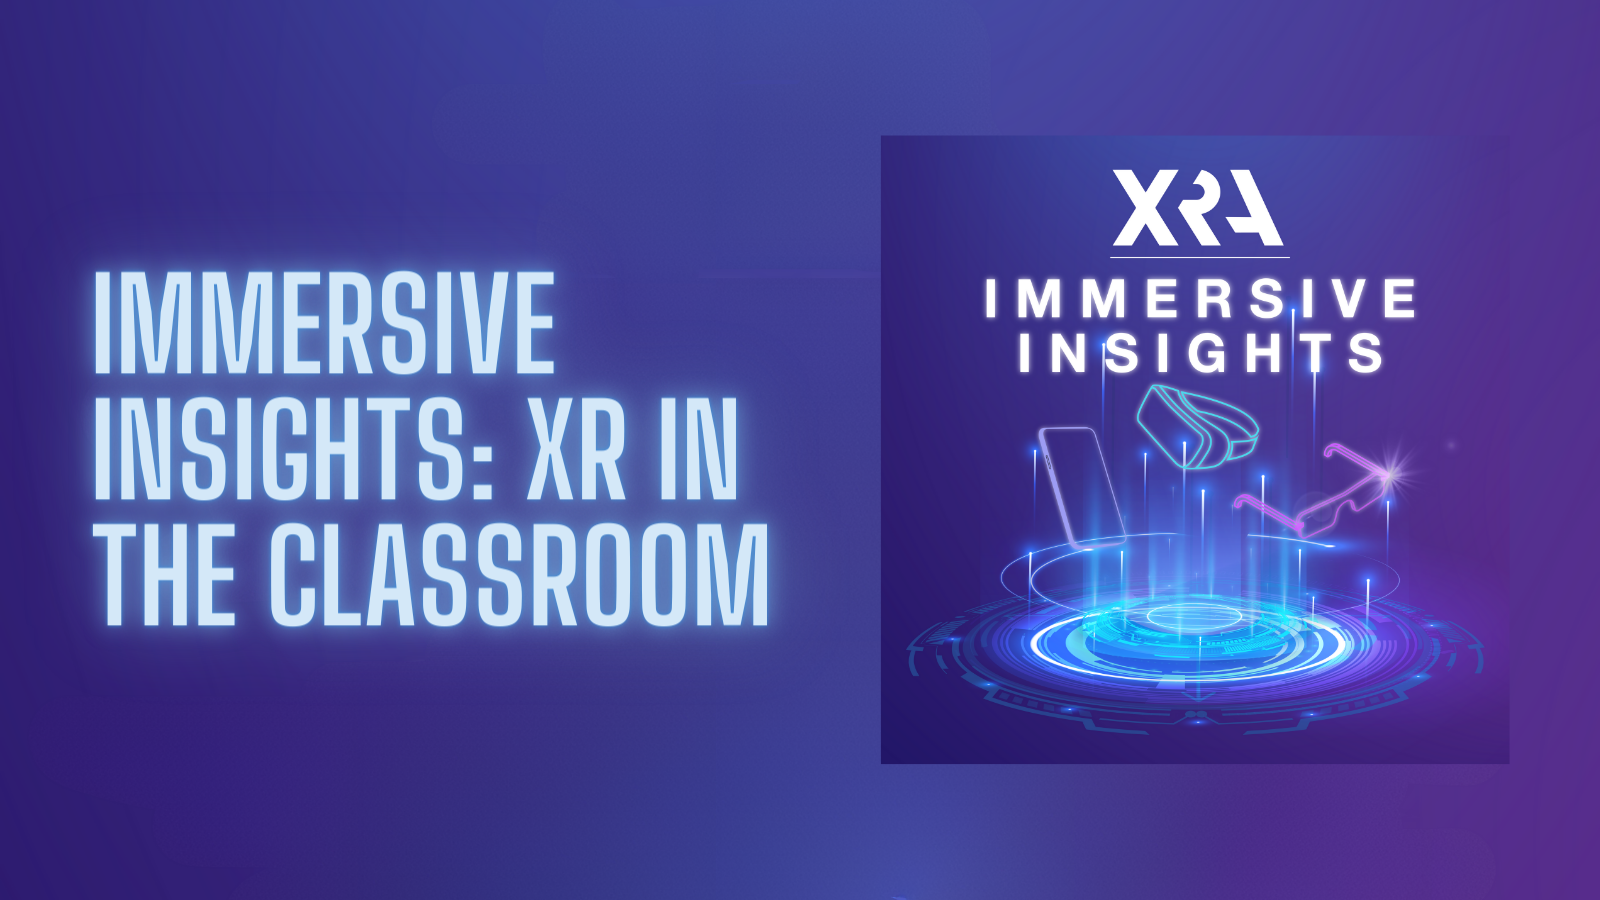 XRA INTRODUCES “IMMERSIVE INSIGHTS: XR IN THE CLASSROOM” AN EDUCATION FOCUSED LIMITED SERIES ON XR TECHNOLOGY